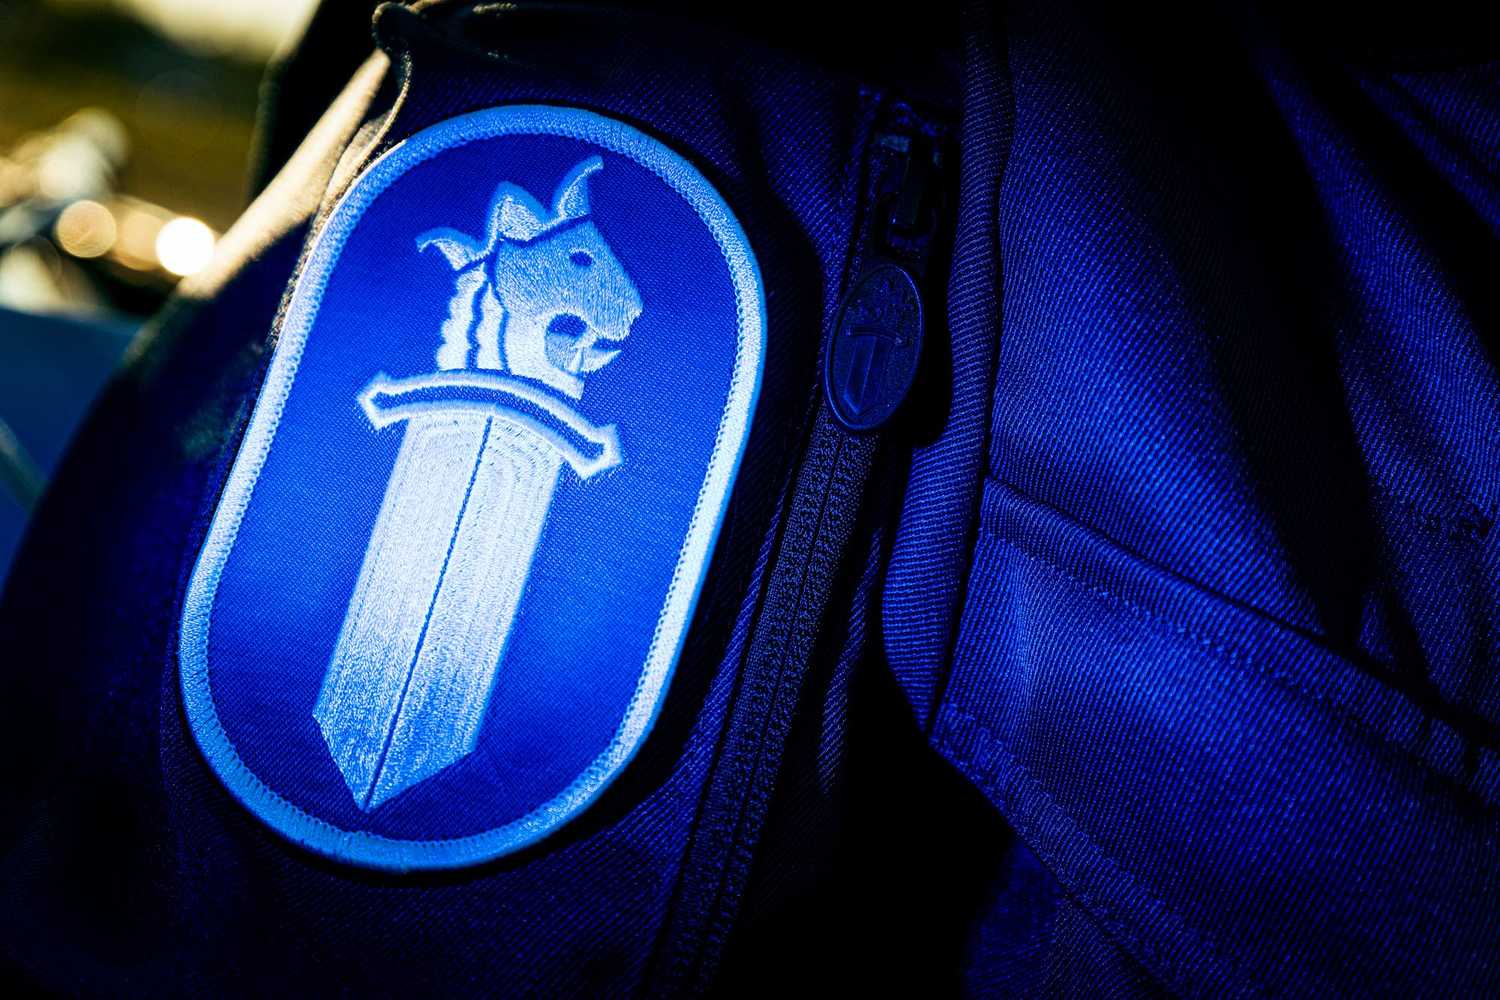 Police sword insignia on the sleeve of the uniform.